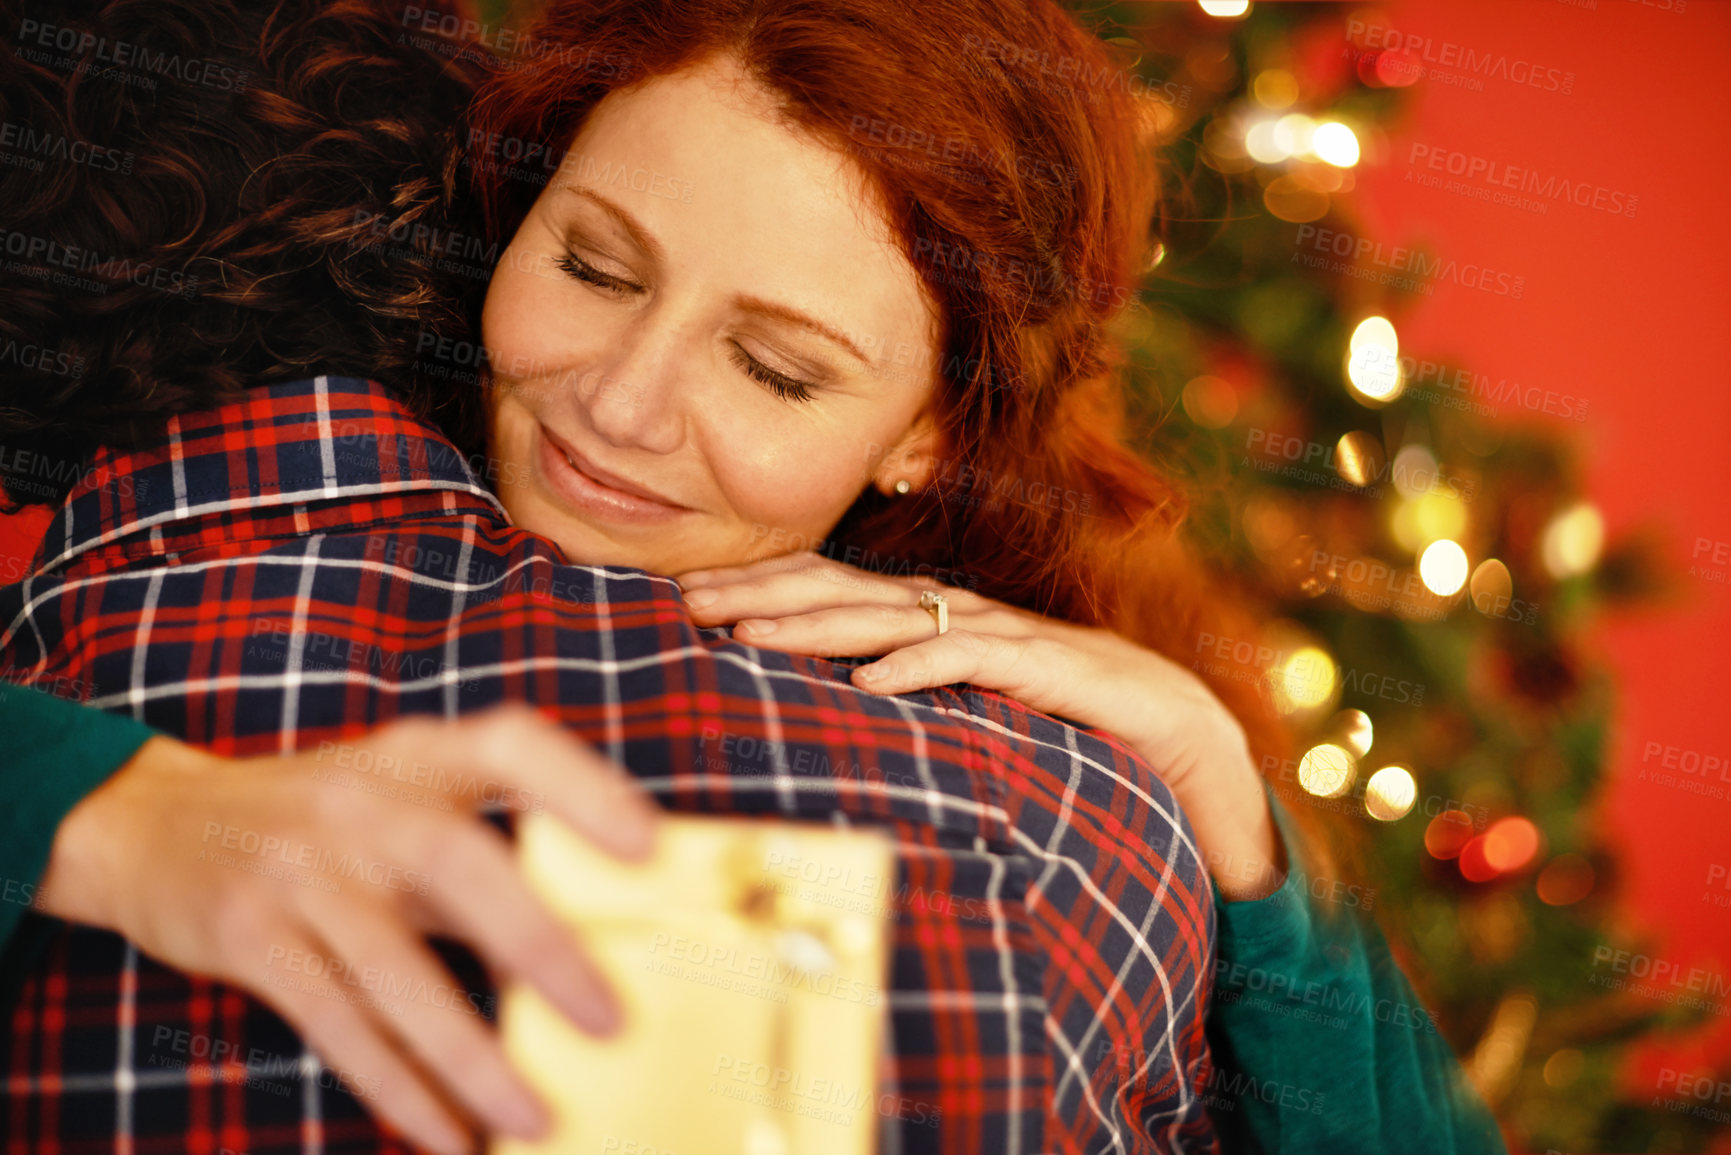 Buy stock photo Shot of a young woman embracing her boyfriend after receiving a gift from him